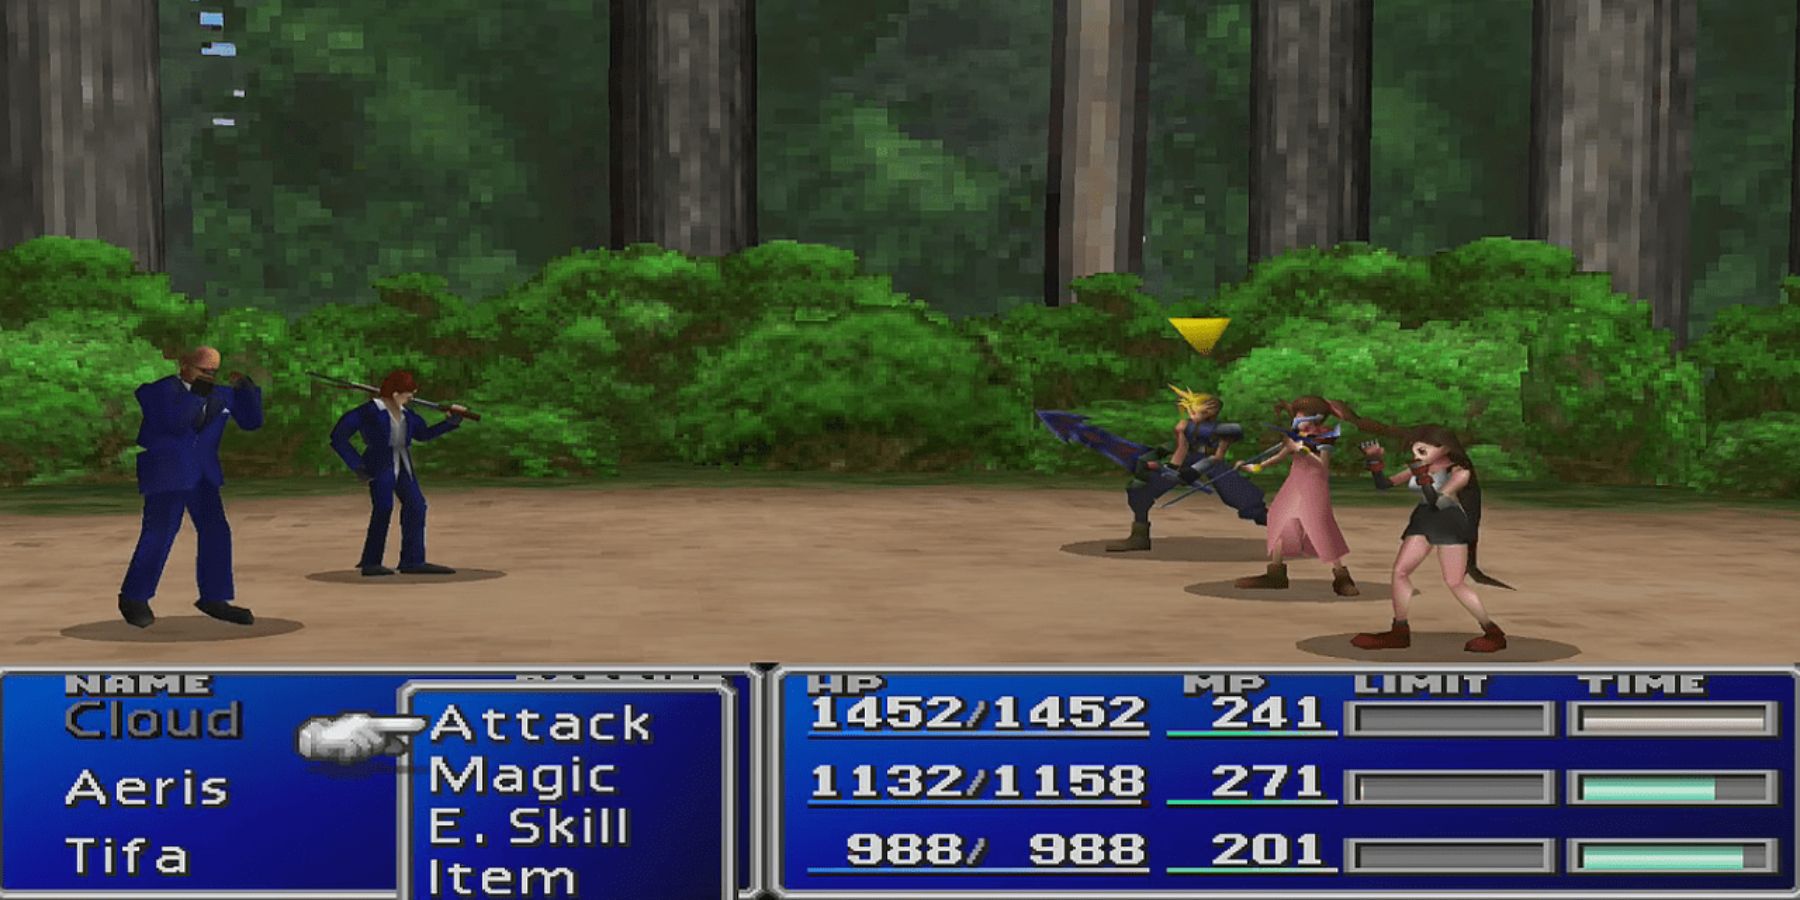 Cloud, Aeris, and Tifa fighting the Turks in Final Fantasy 7